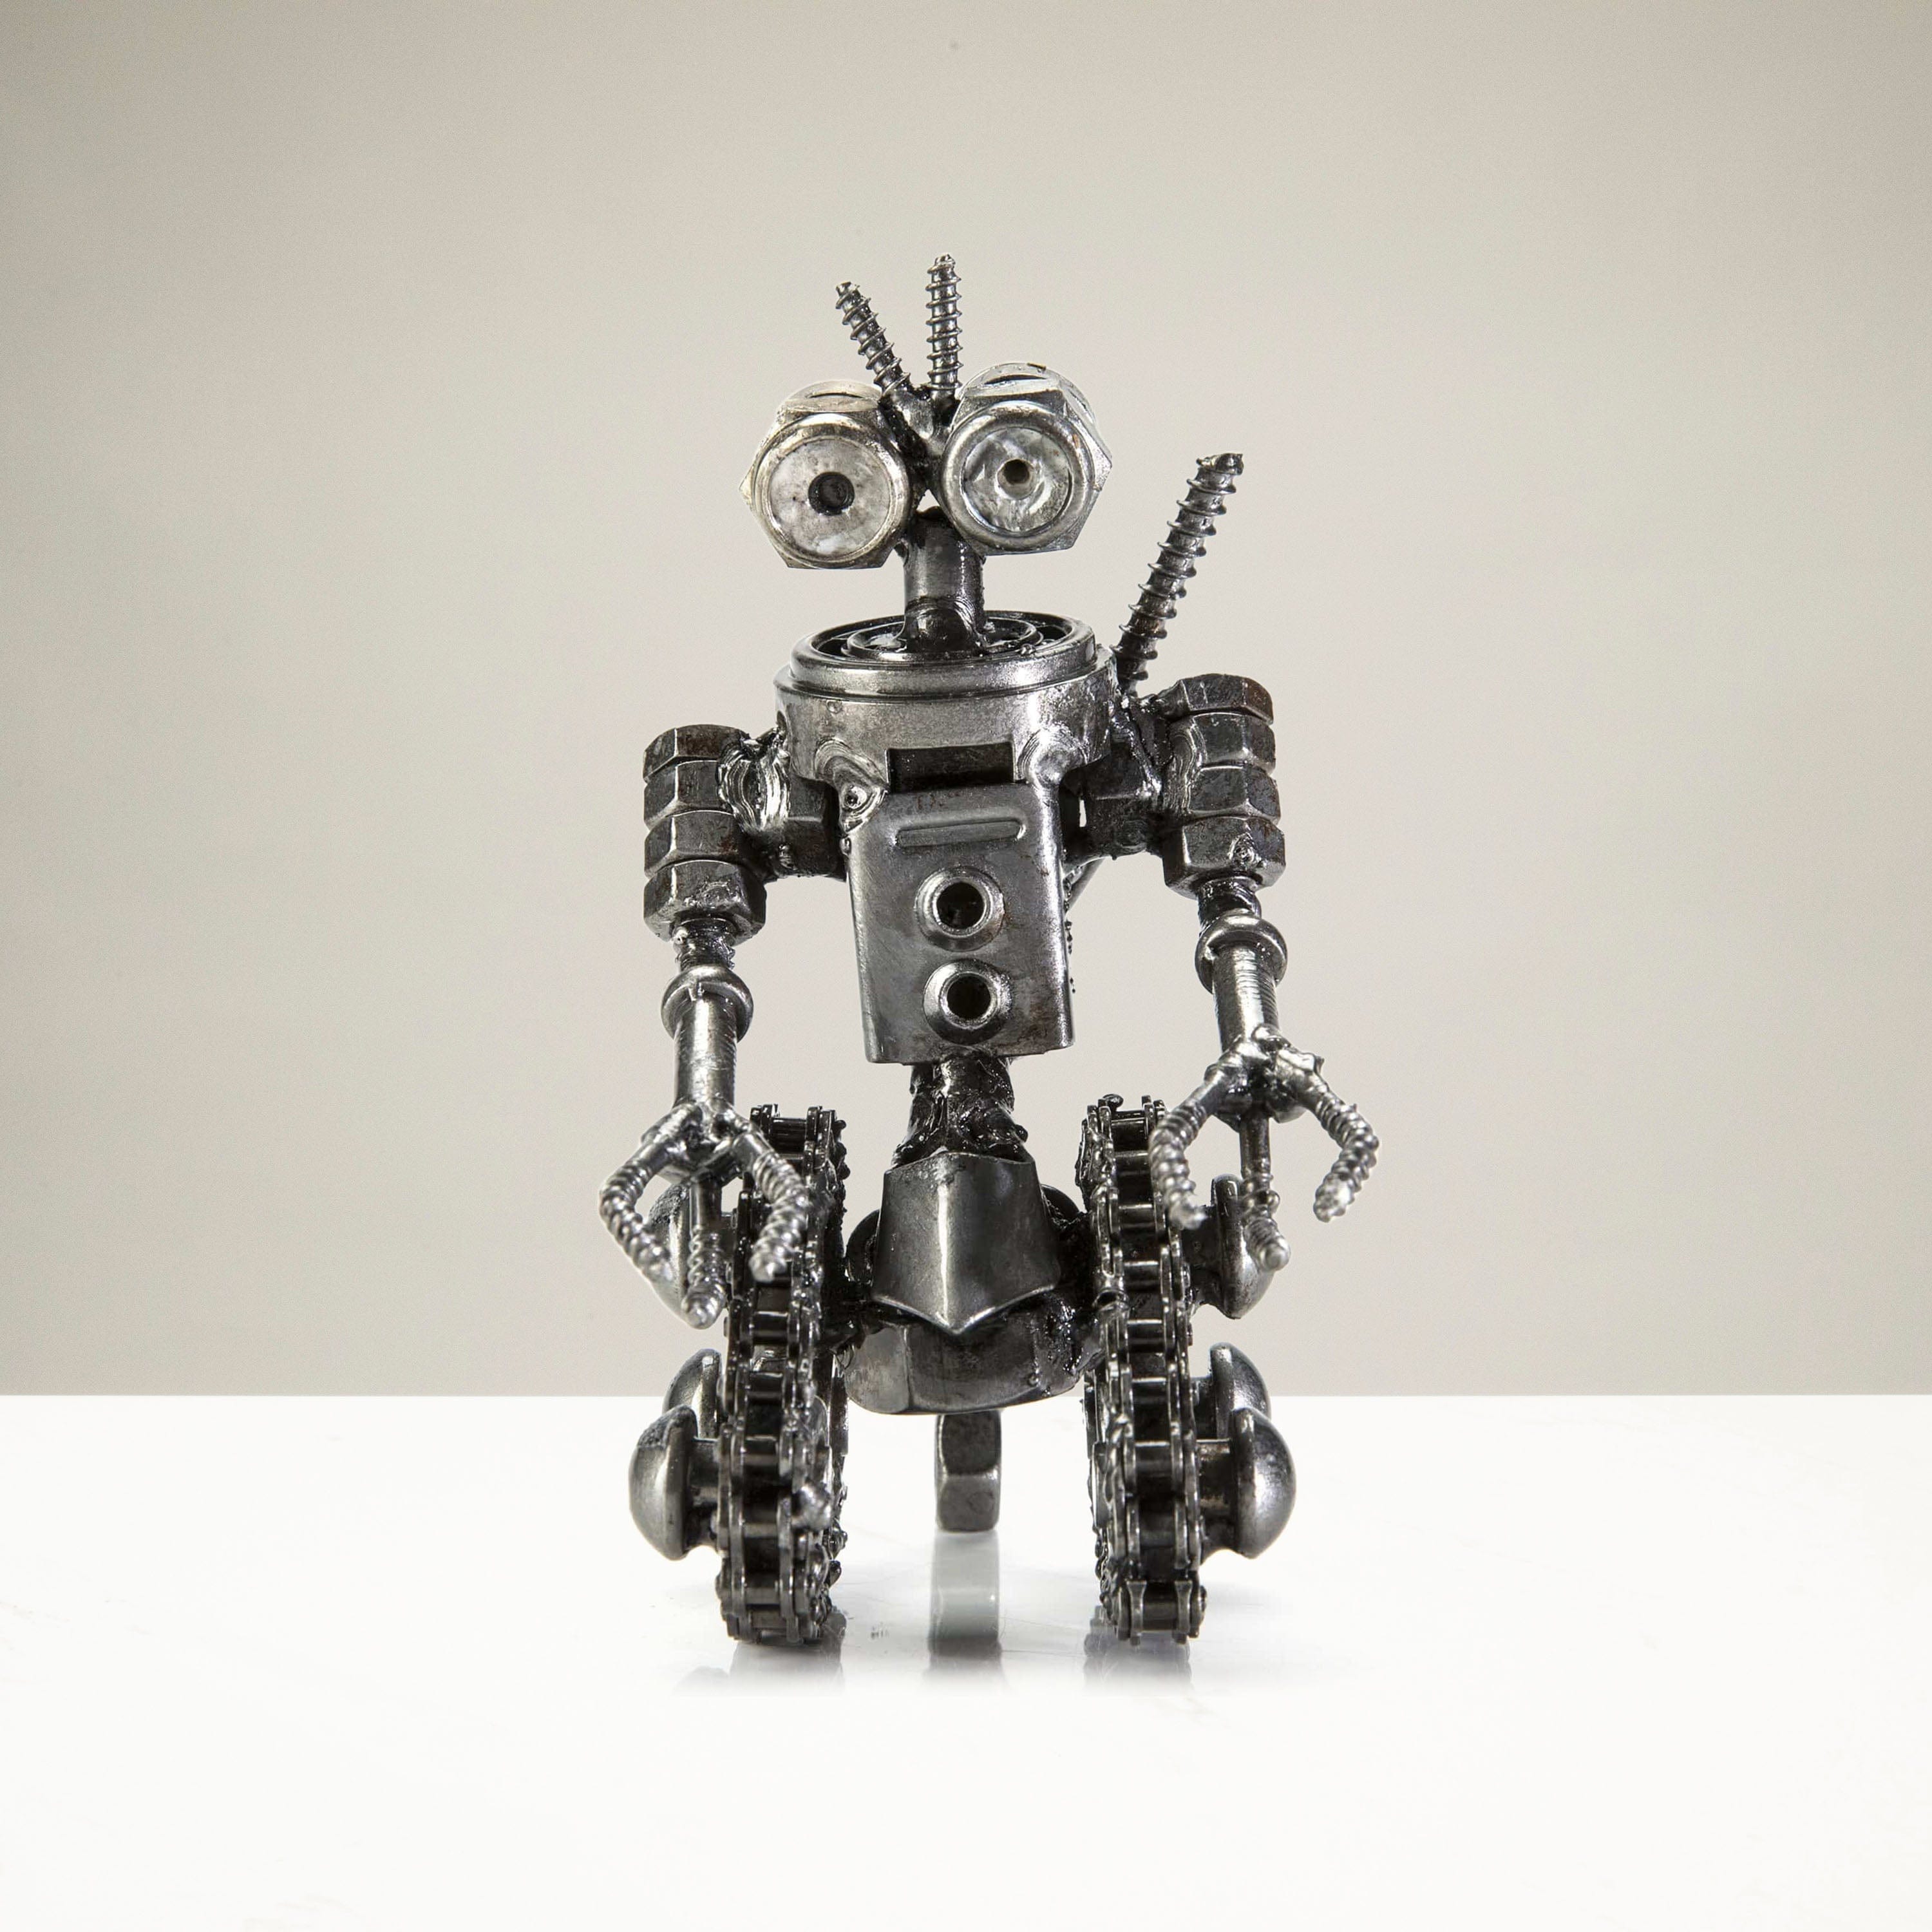 Kalifano Recycled Metal Art Johnny-5 Inspired Recycled Metal Sculpture RMS-250J5-N